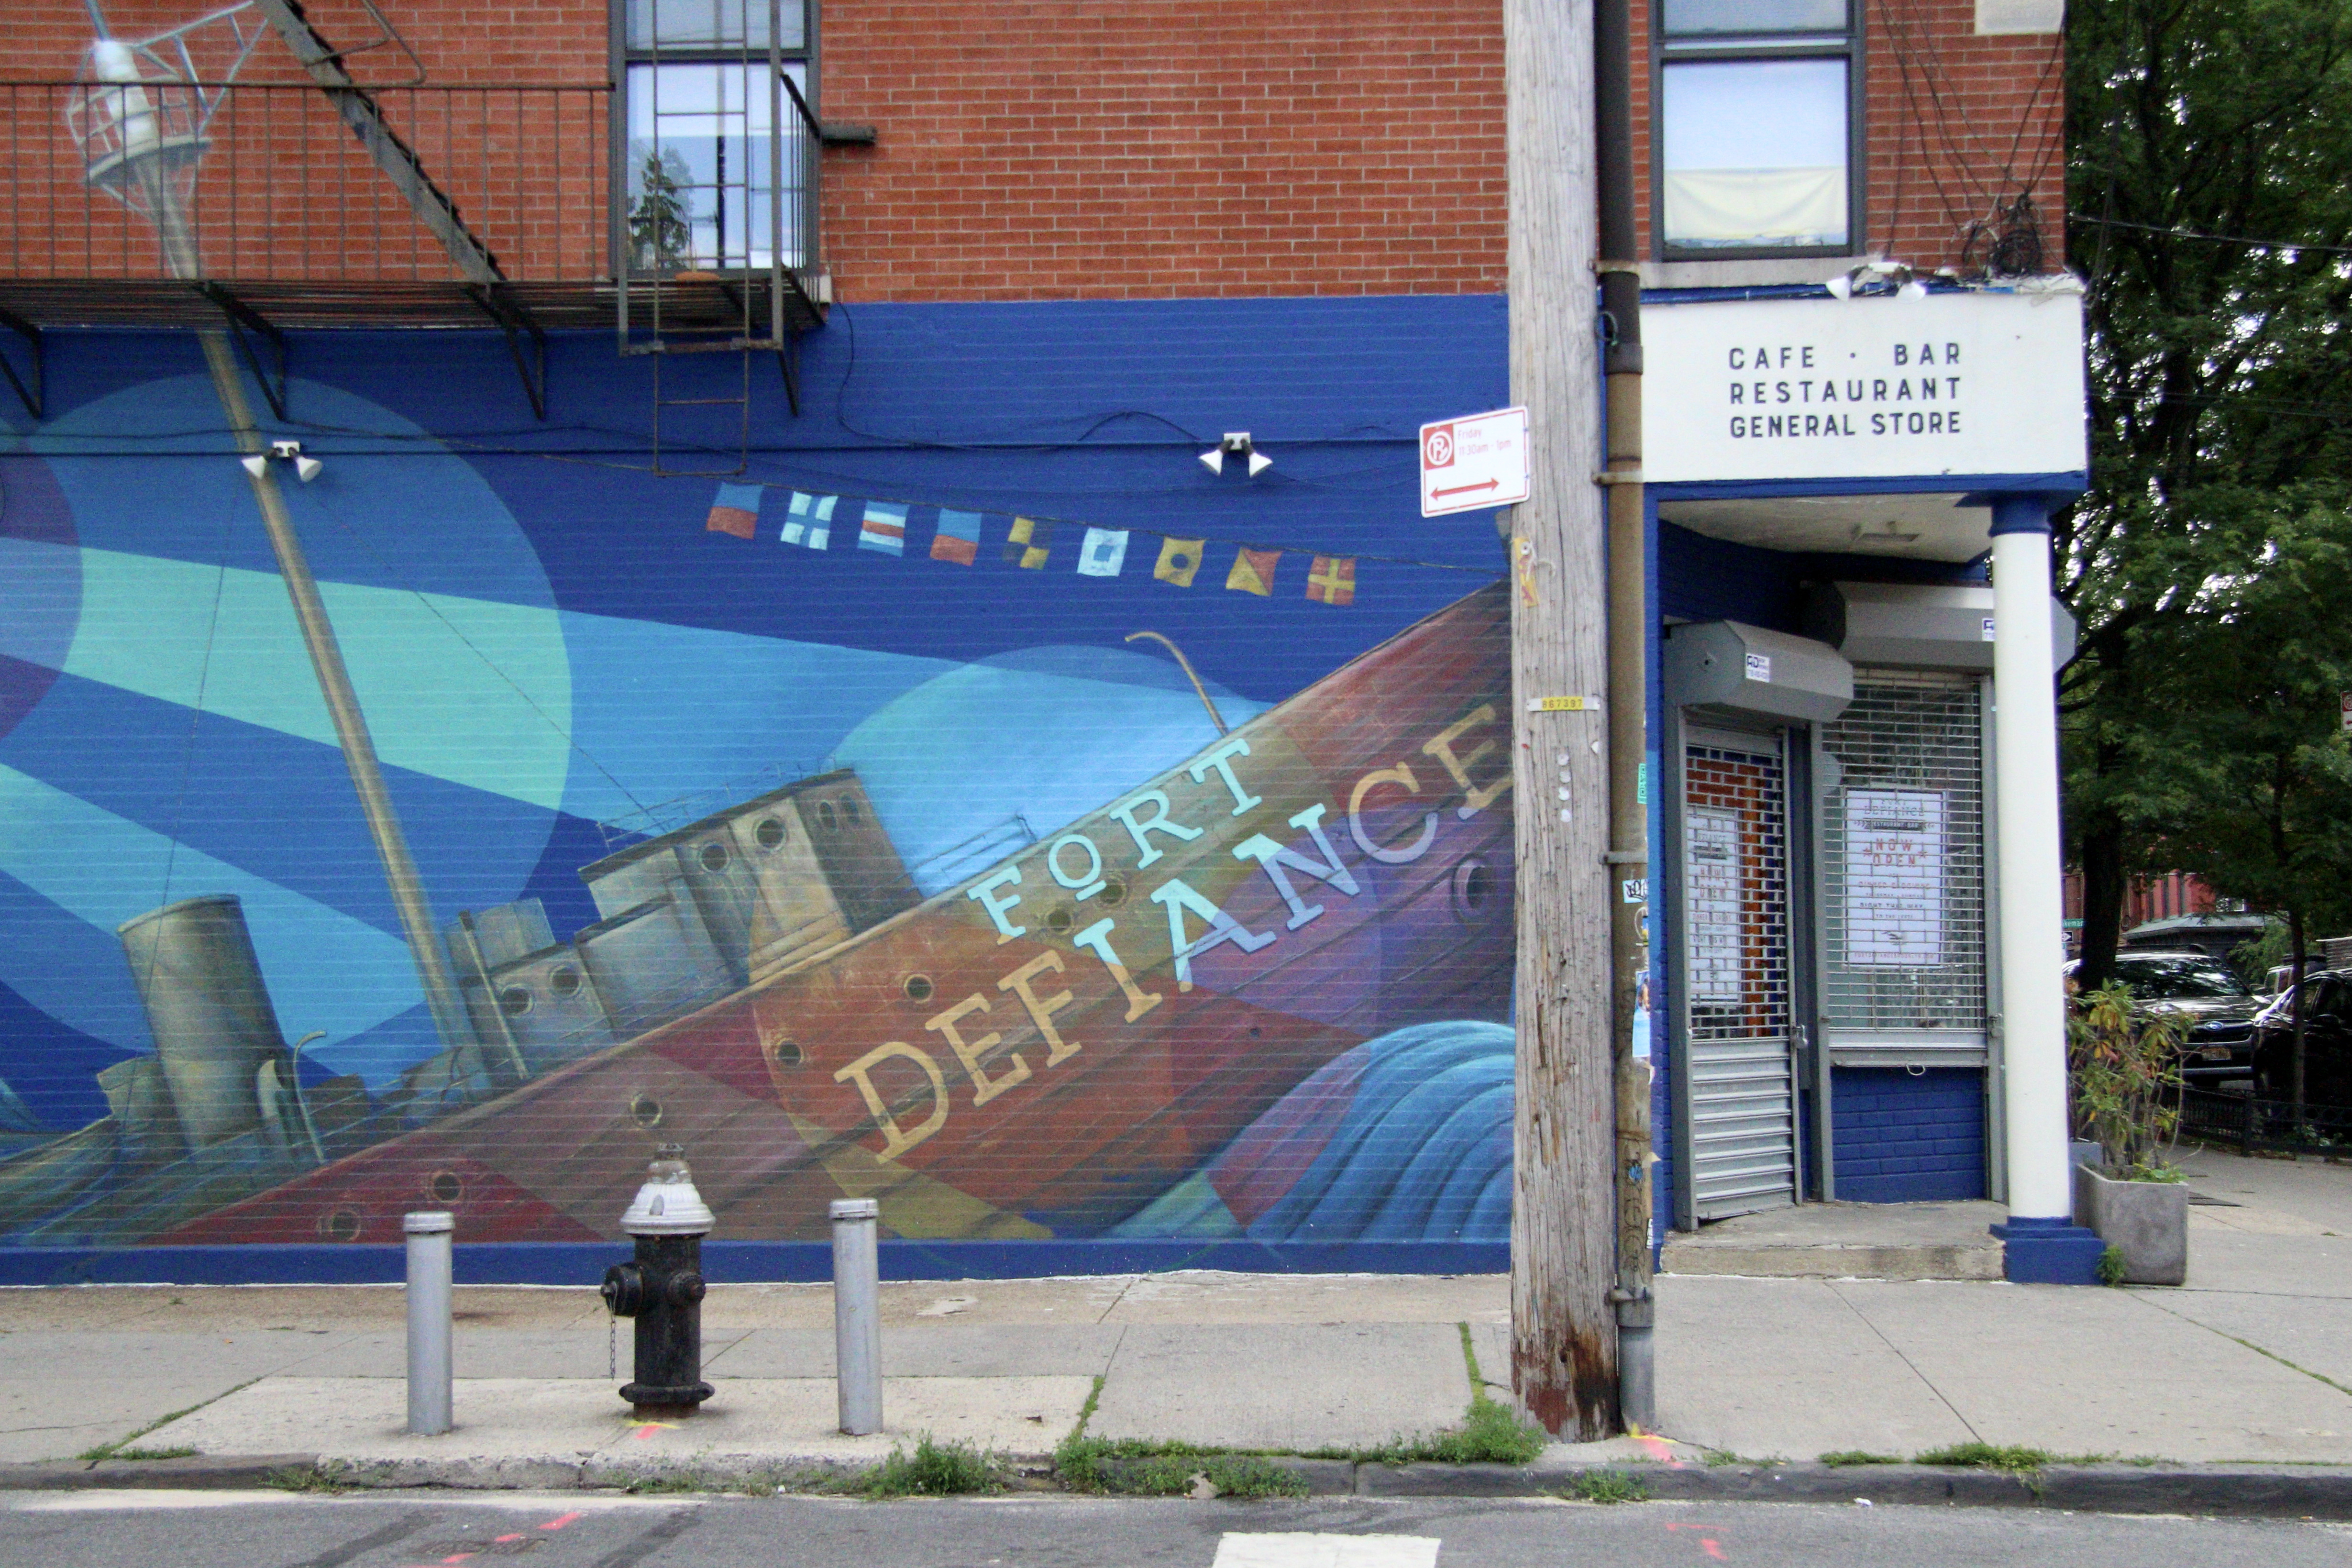 A blue brick restaurant exterior with a ship mural painted on the side.